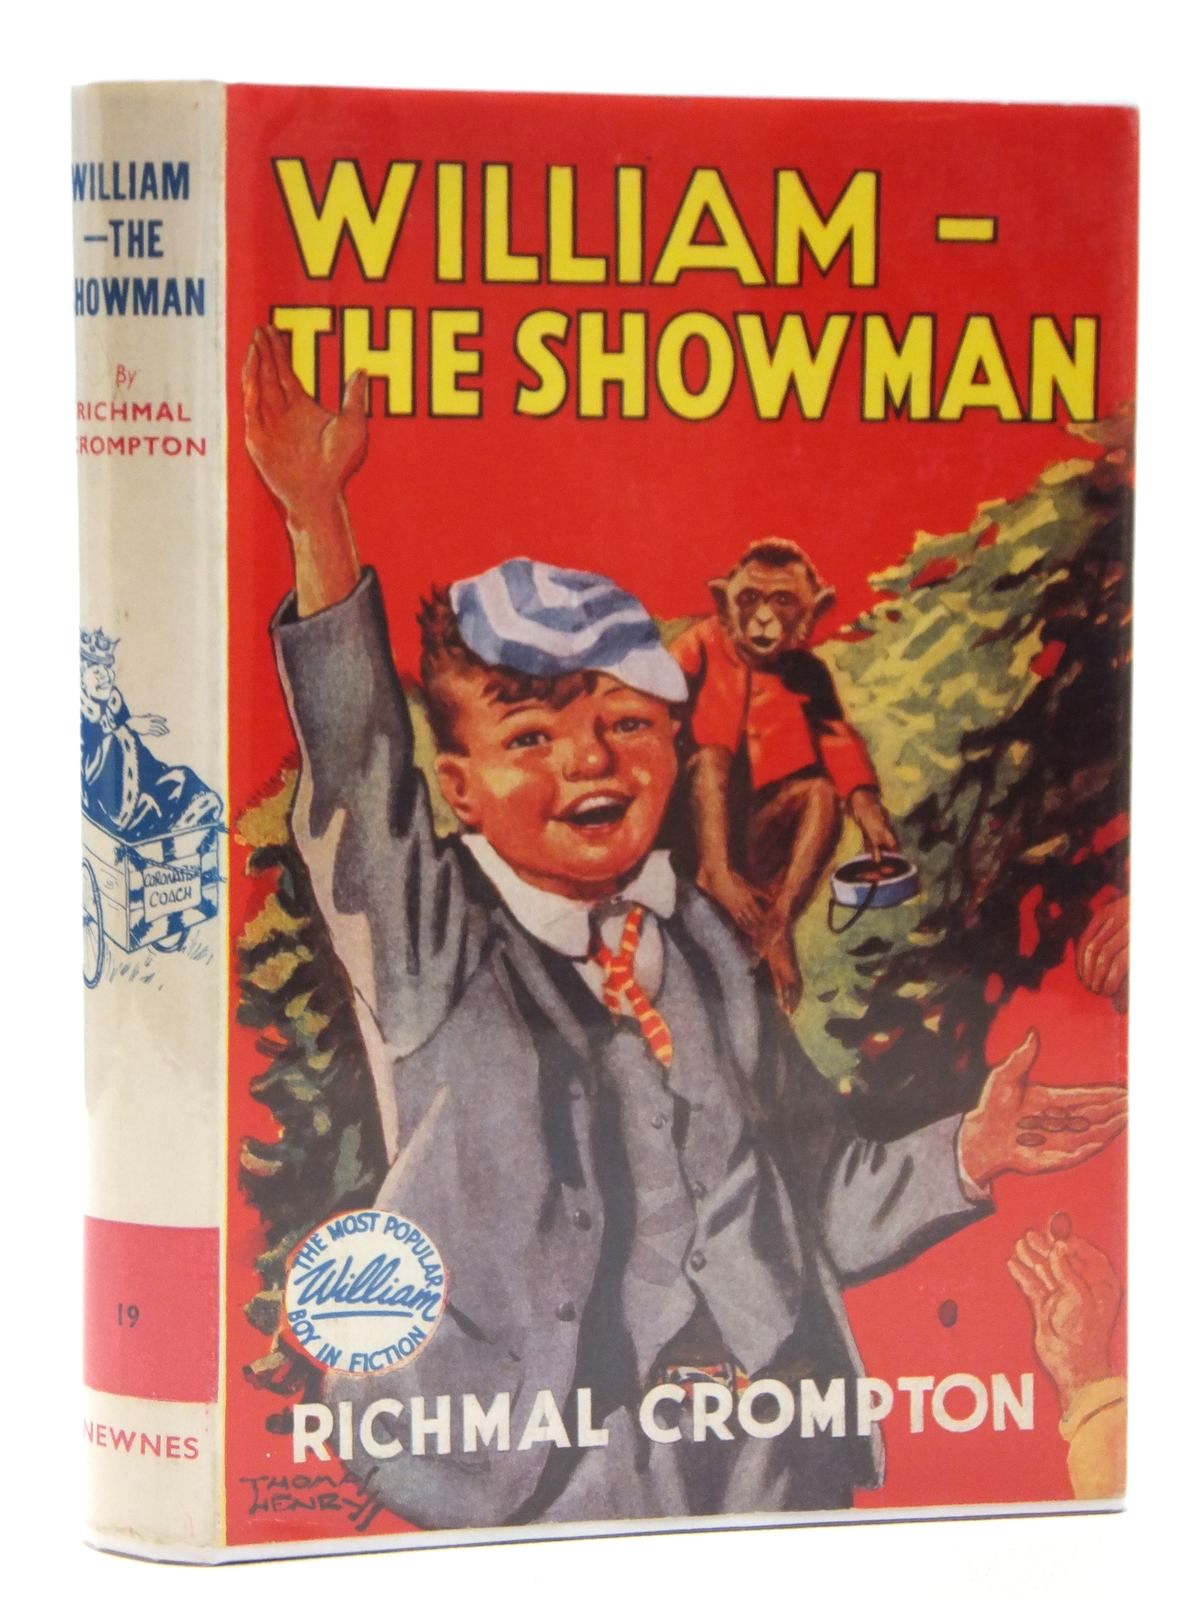 Cover of WILLIAM THE SHOWMAN by Richmal Crompton